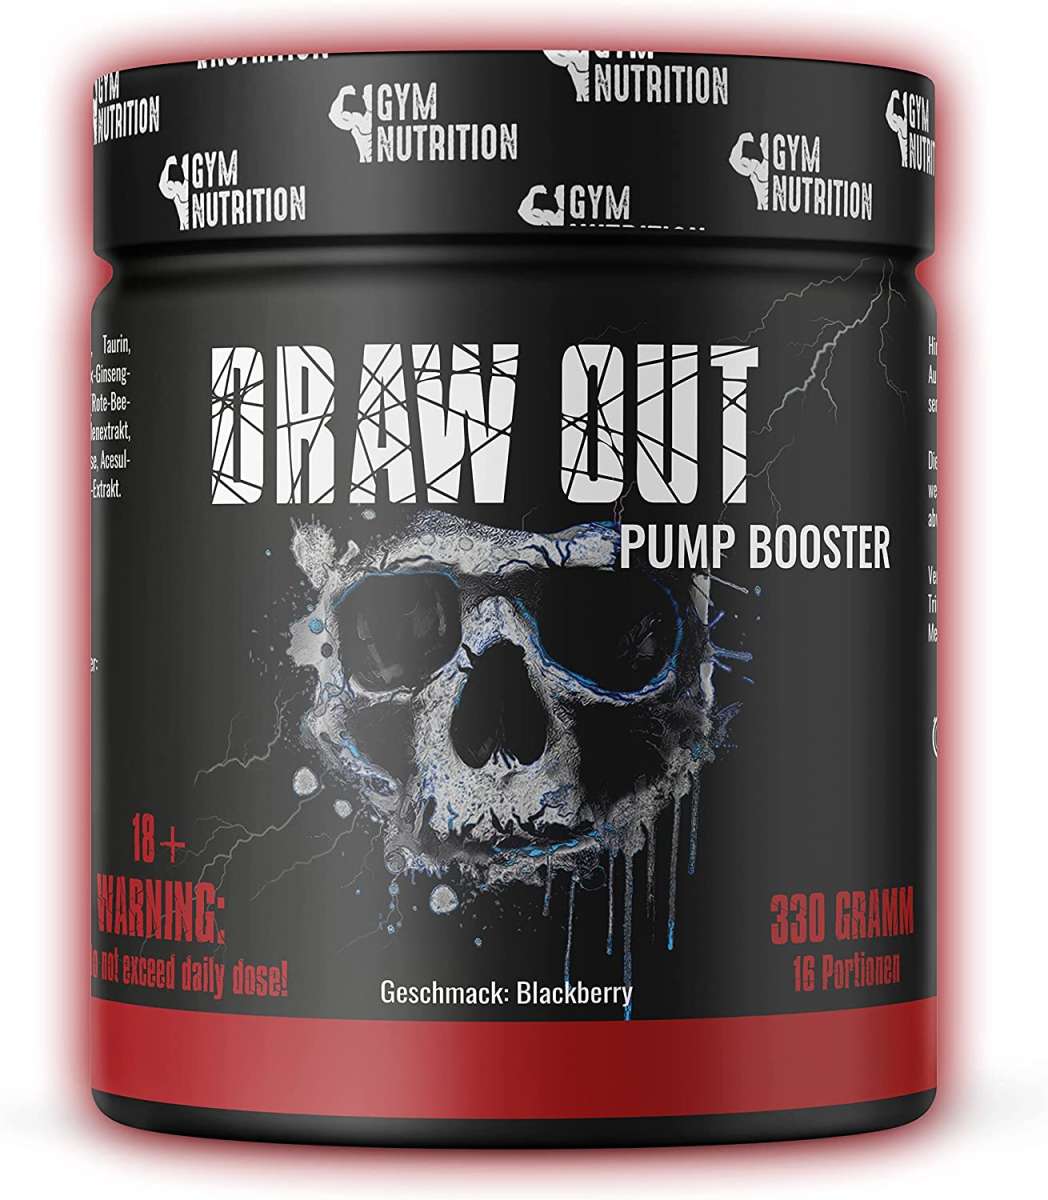 Gym Nutrition DRAW OUT PUMP BOOSTER  - 330g